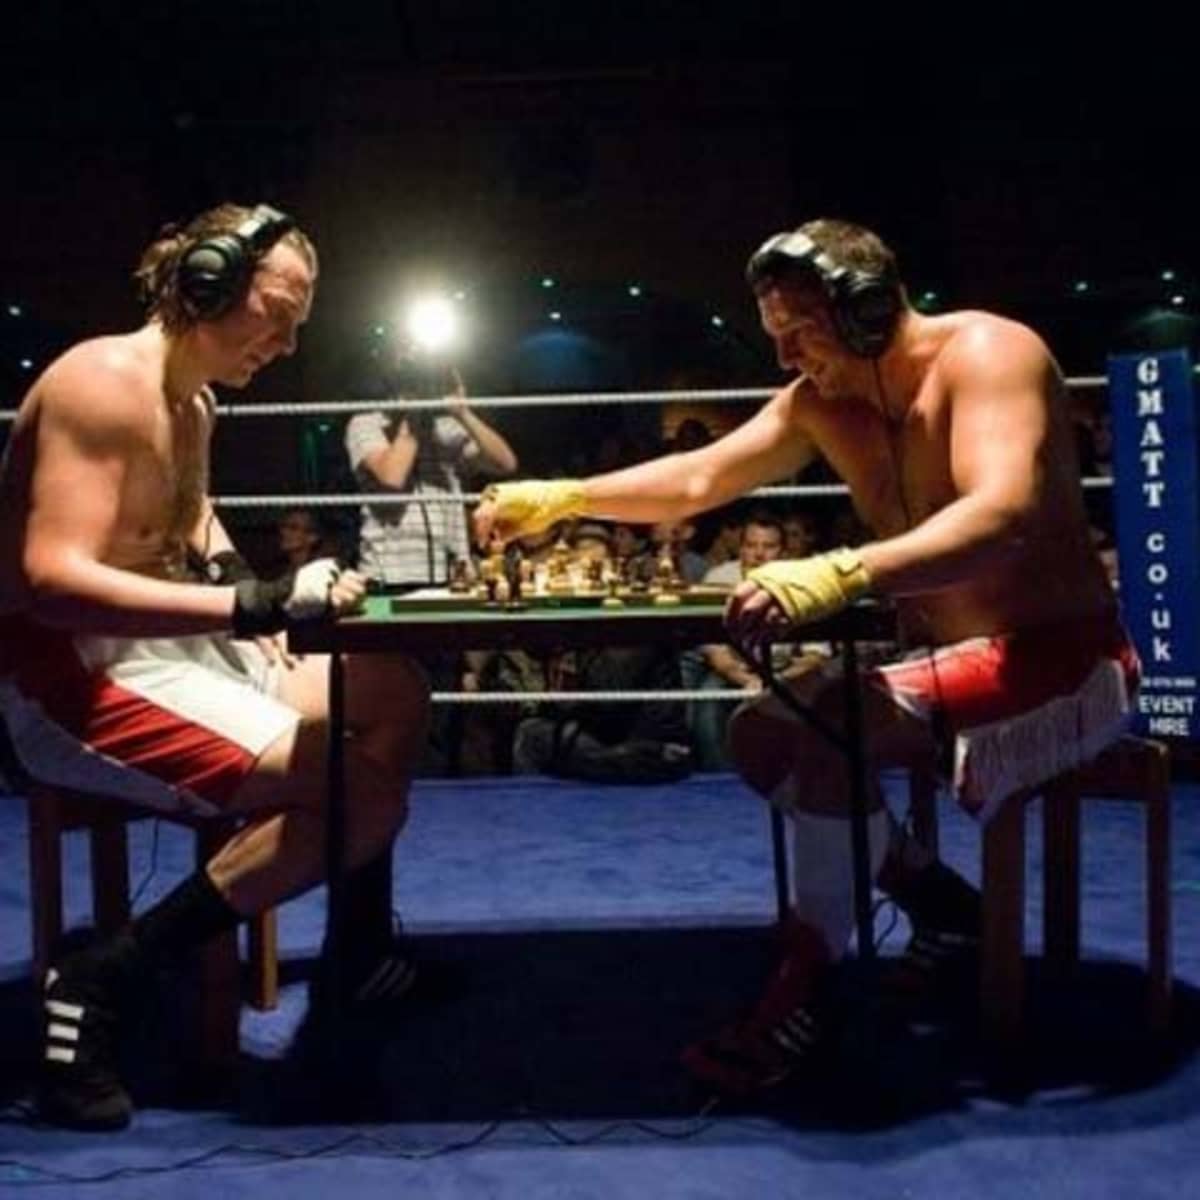 Checkmate or knockout? 3 things to know about chessboxing